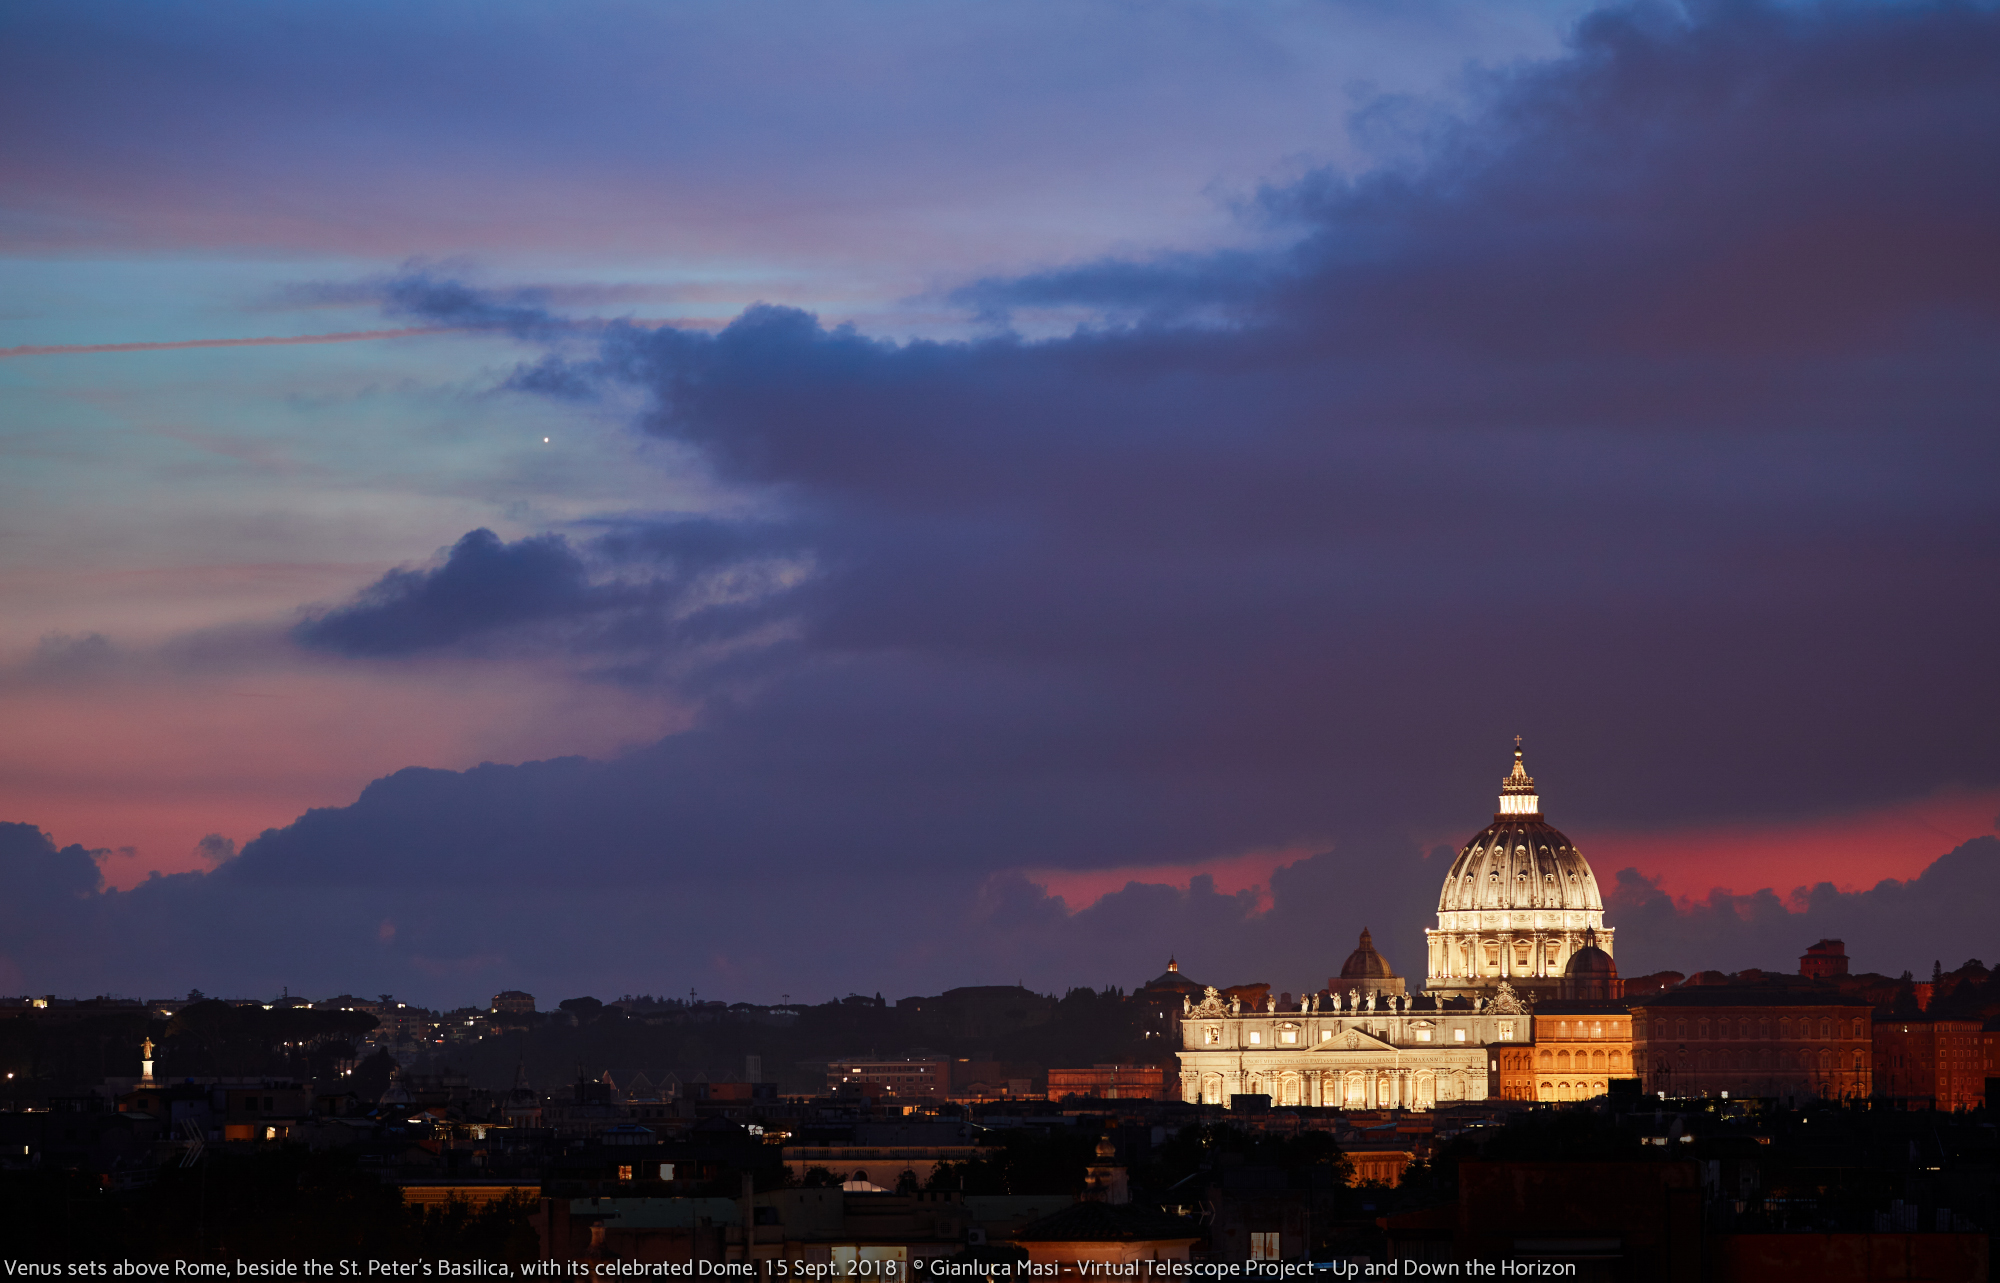 Venus sets beside the legendary St. Peter's Dome and Basilica - 15 Sept. 2018